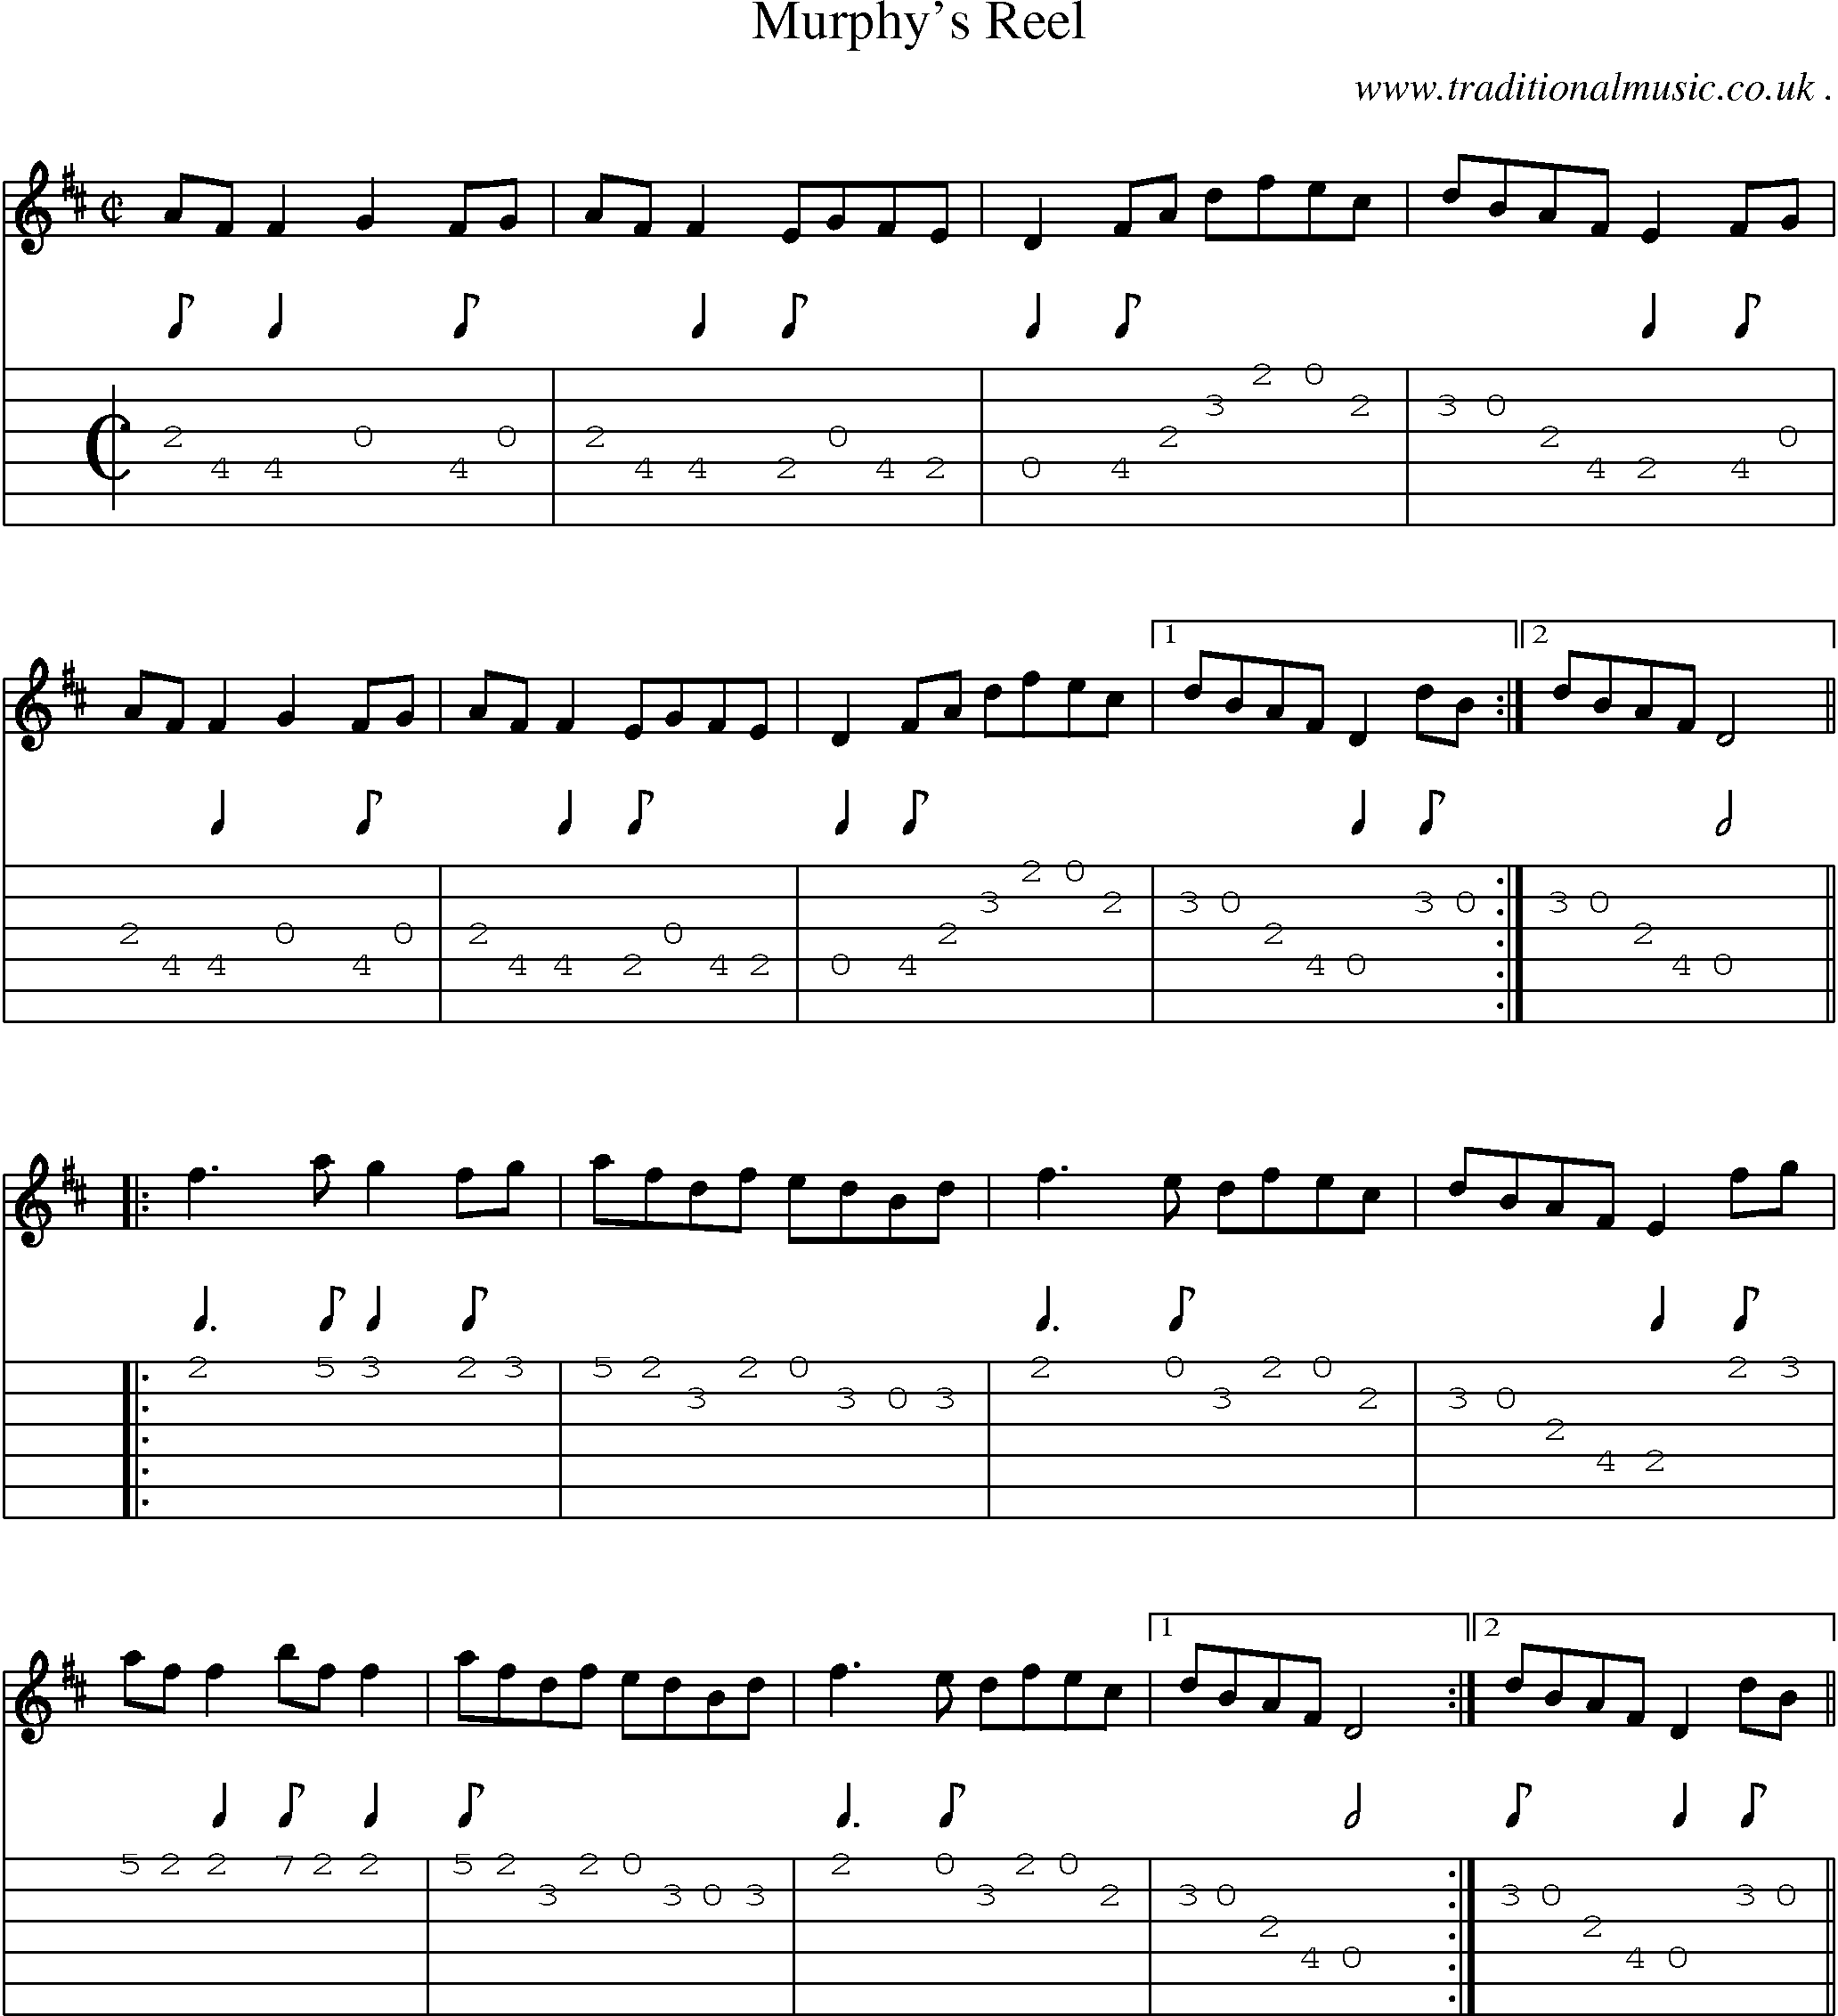 Sheet-Music and Guitar Tabs for Murphys Reel